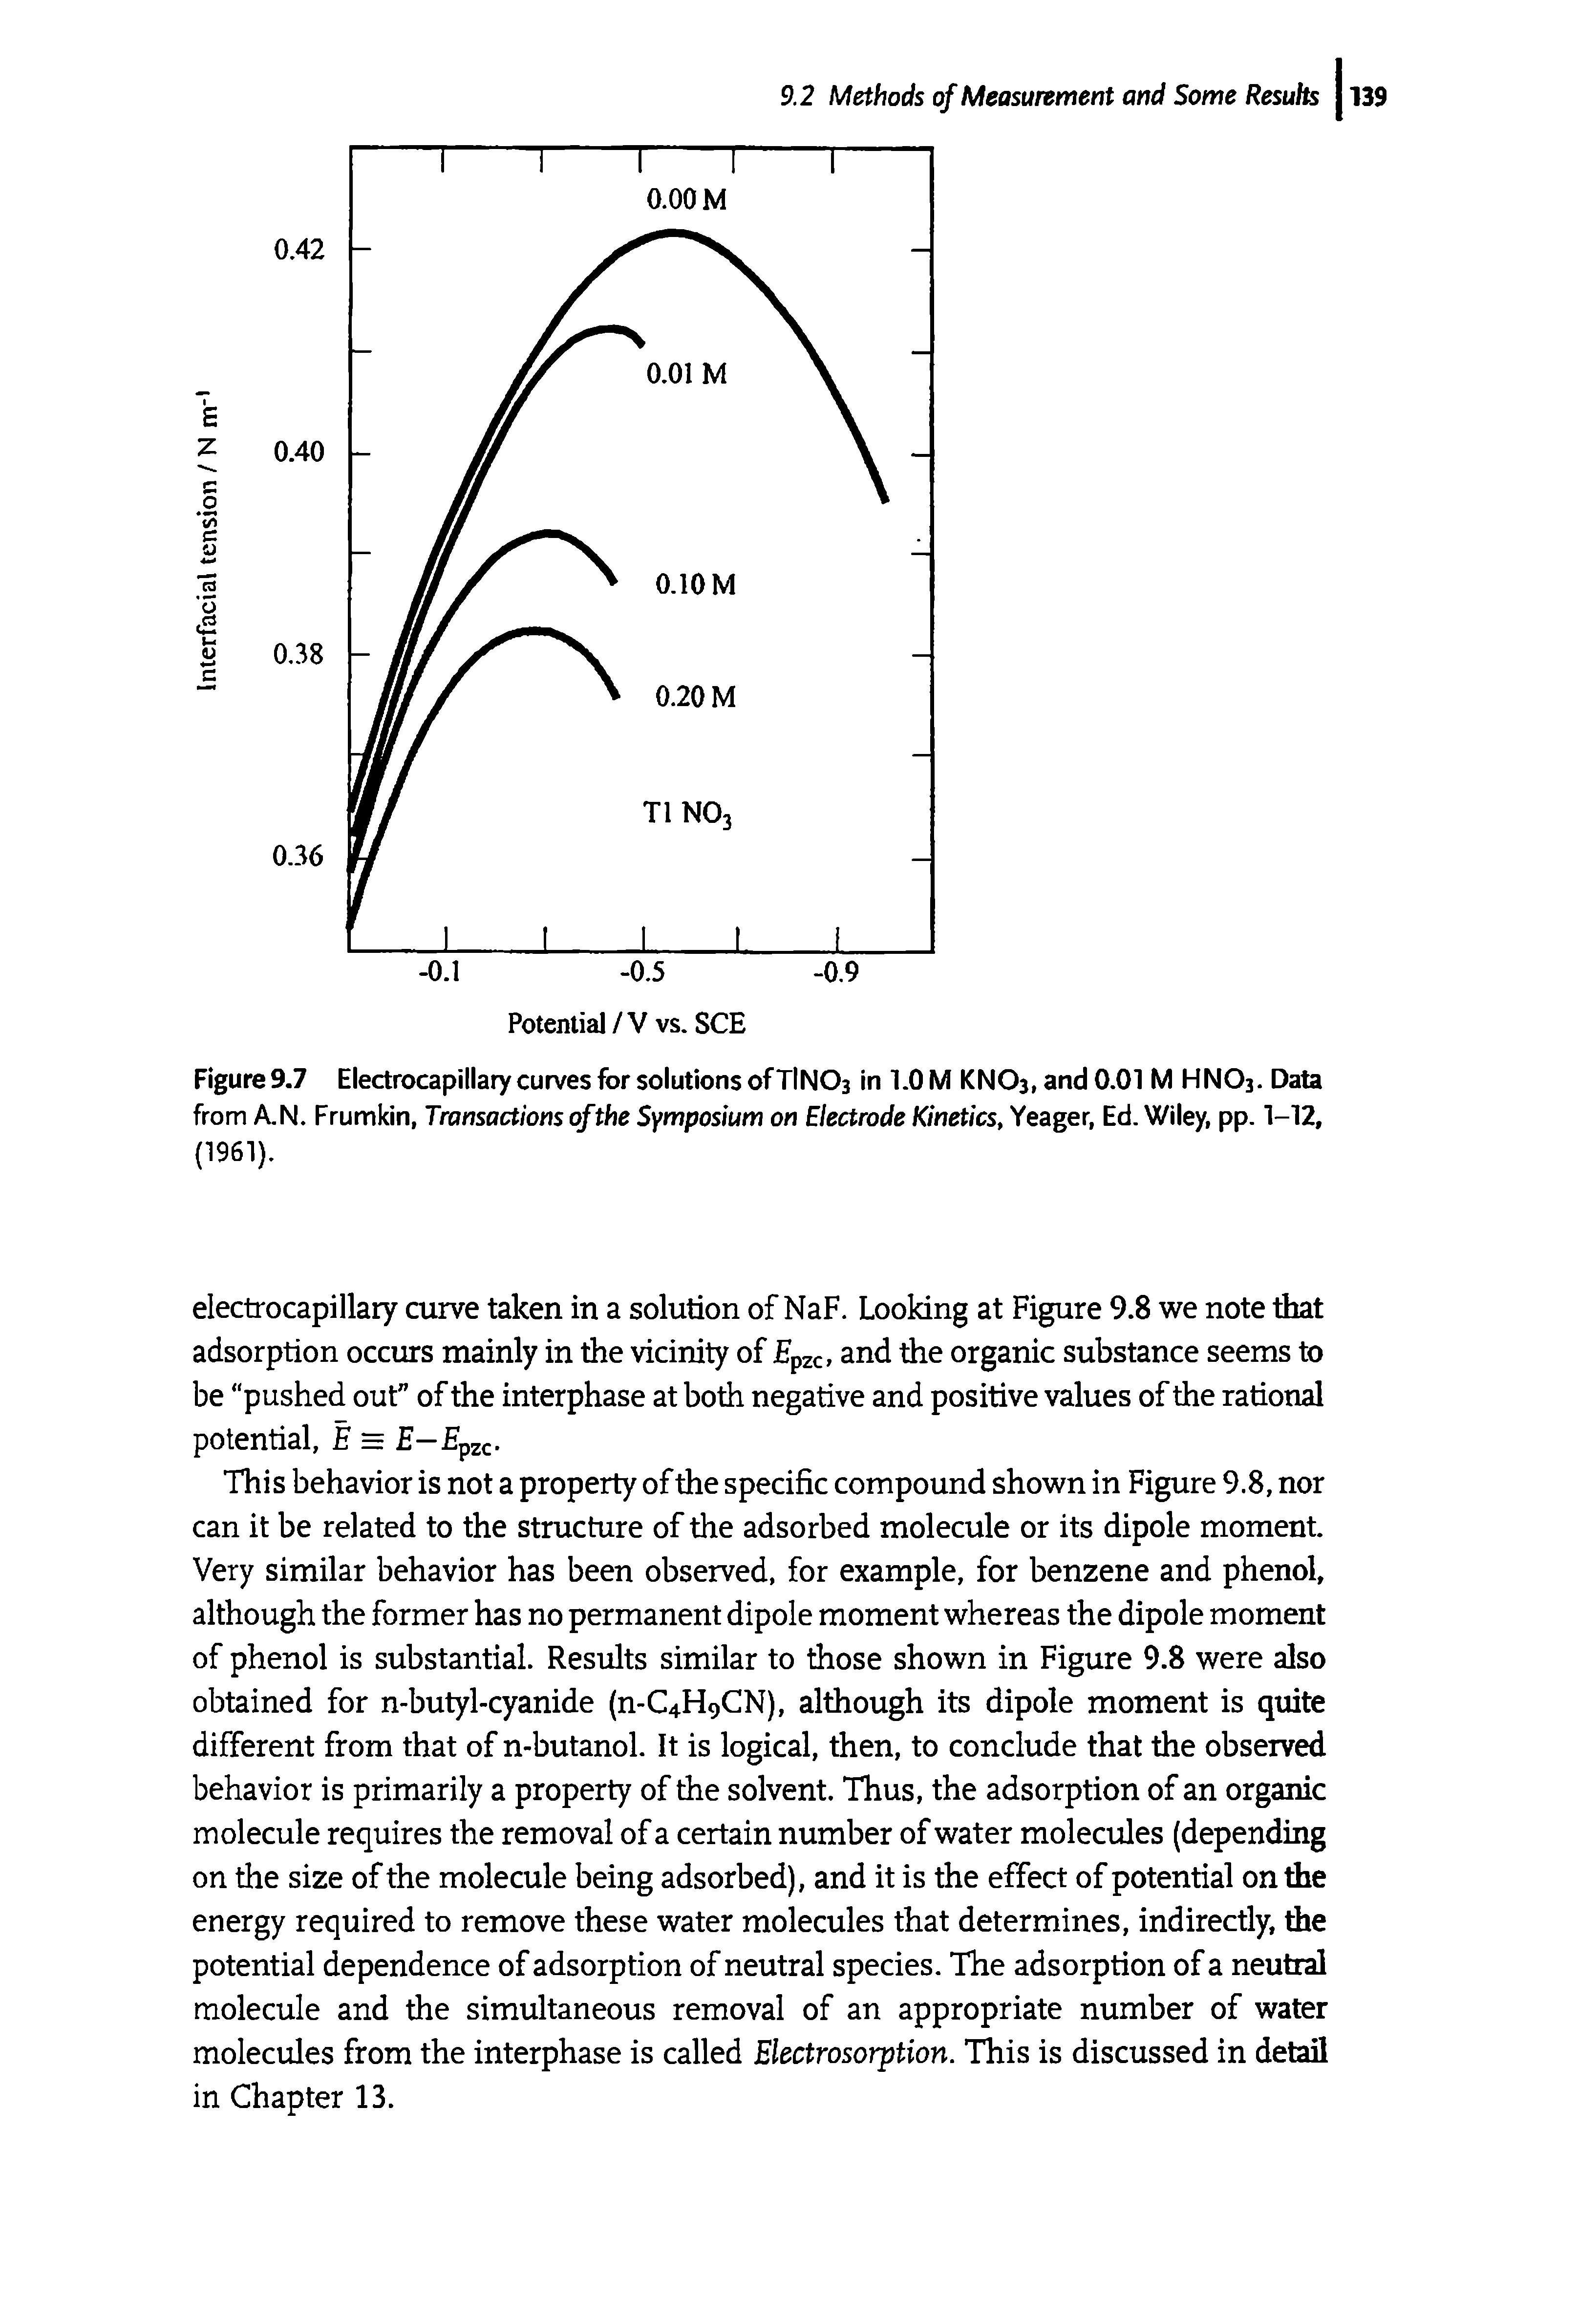 Figure 9.7 Electrocapillary curves for solutions of TINO3 in 1.0 M KNO3, and 0.01 M HNO3. Data from A.N. Frumkin, Transactions of the Symposium on Electrode Kinetics, Yeager, Ed. Wiley, pp. 1-12, (1961).